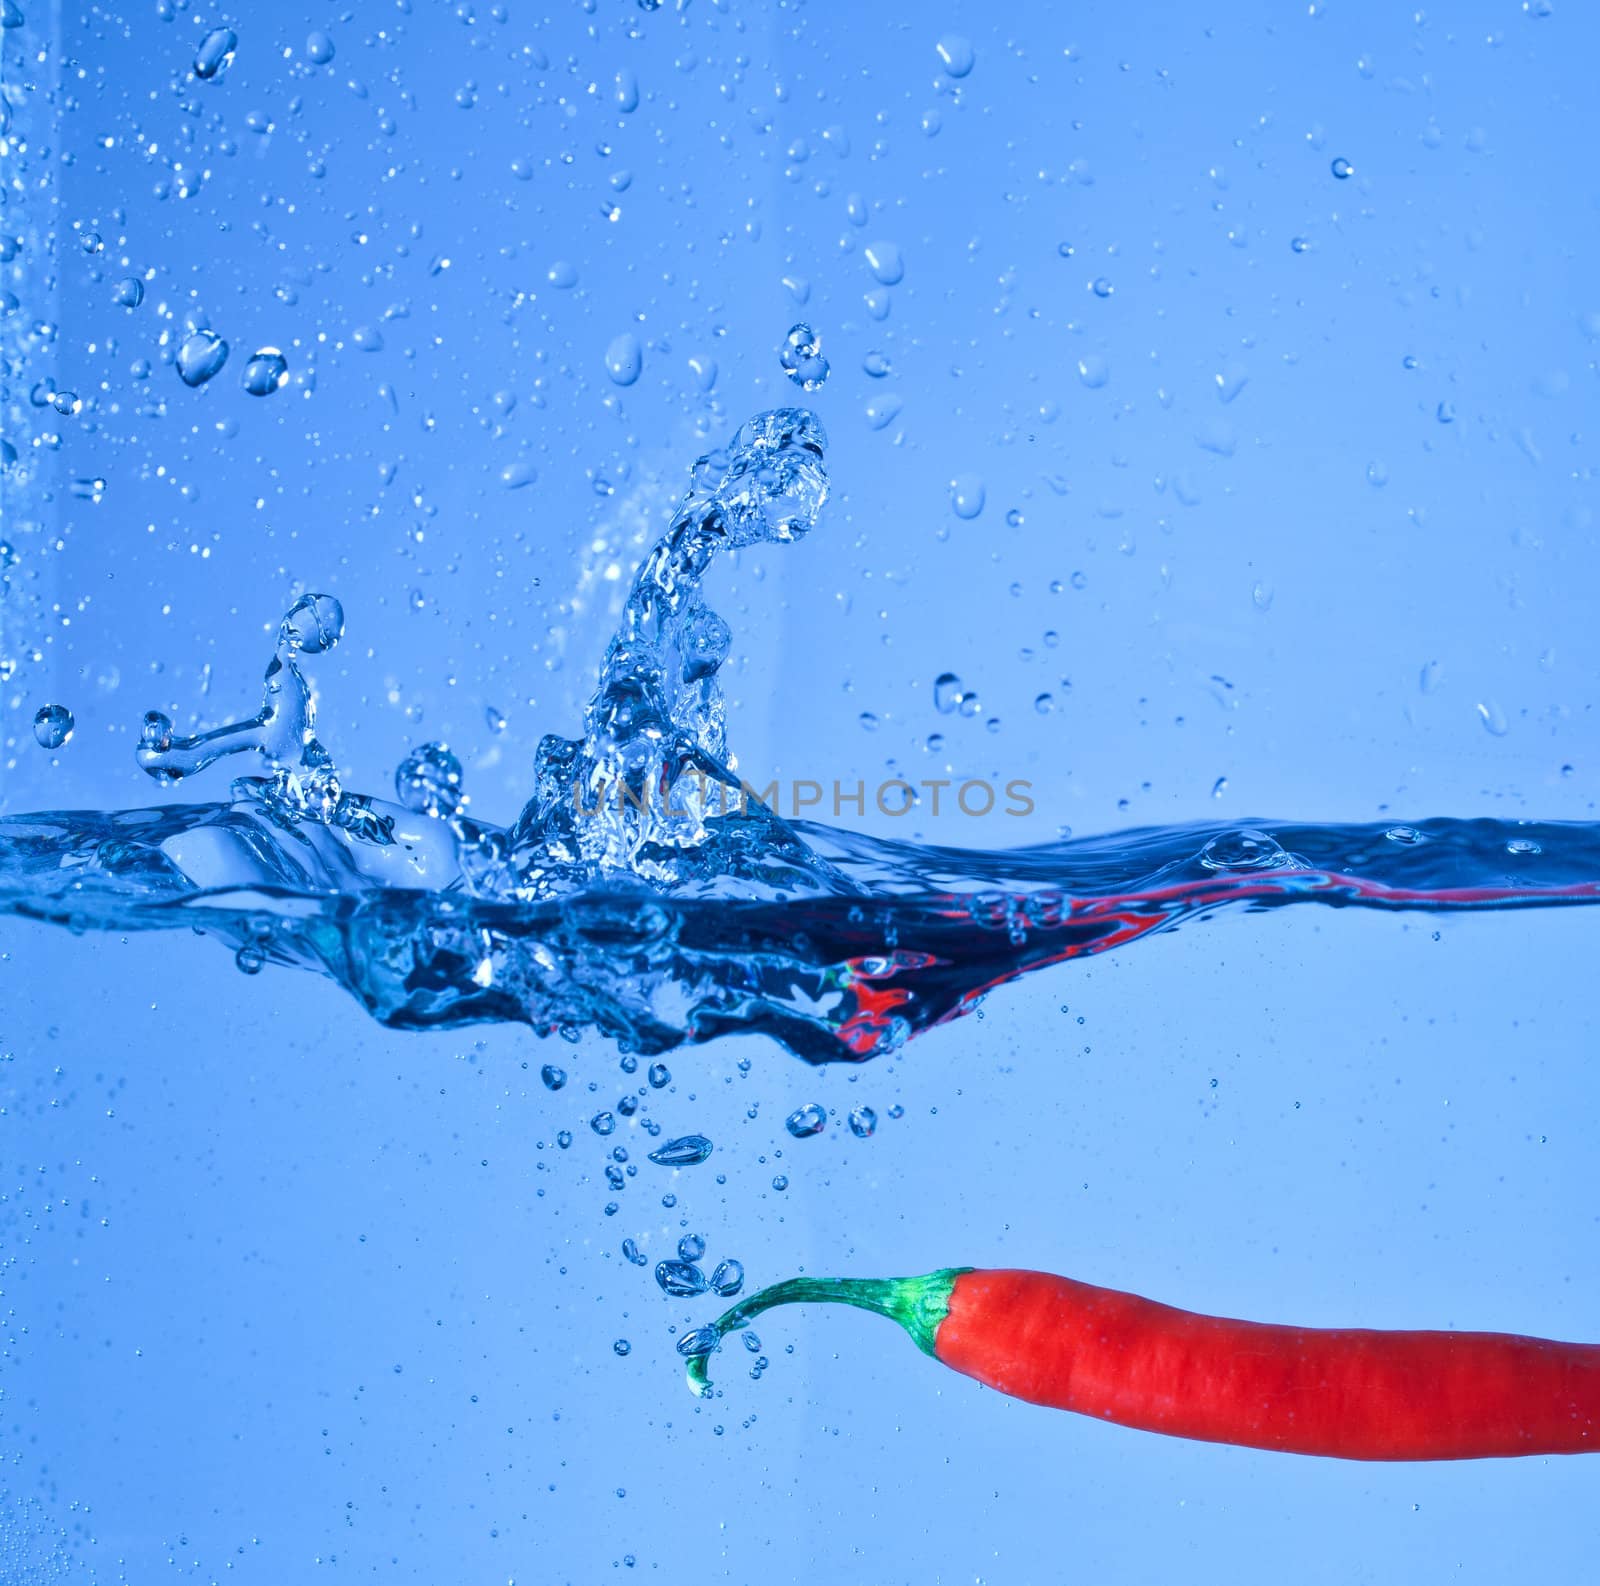 red pepper dropped into water with splash by Discovod